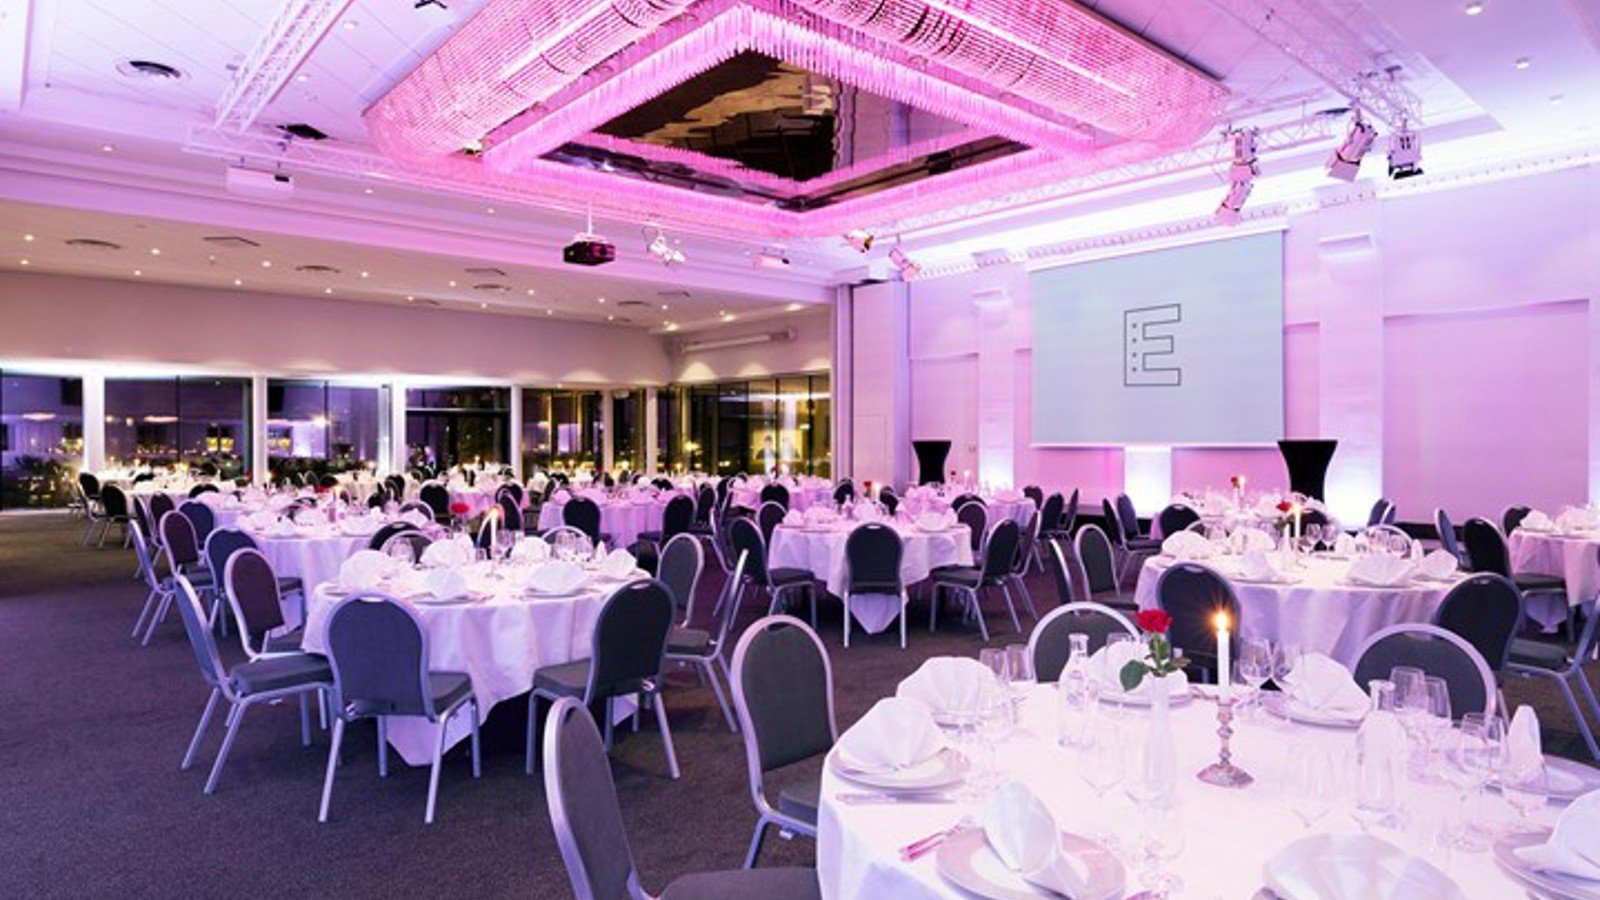 Event with round tables and pink lighting